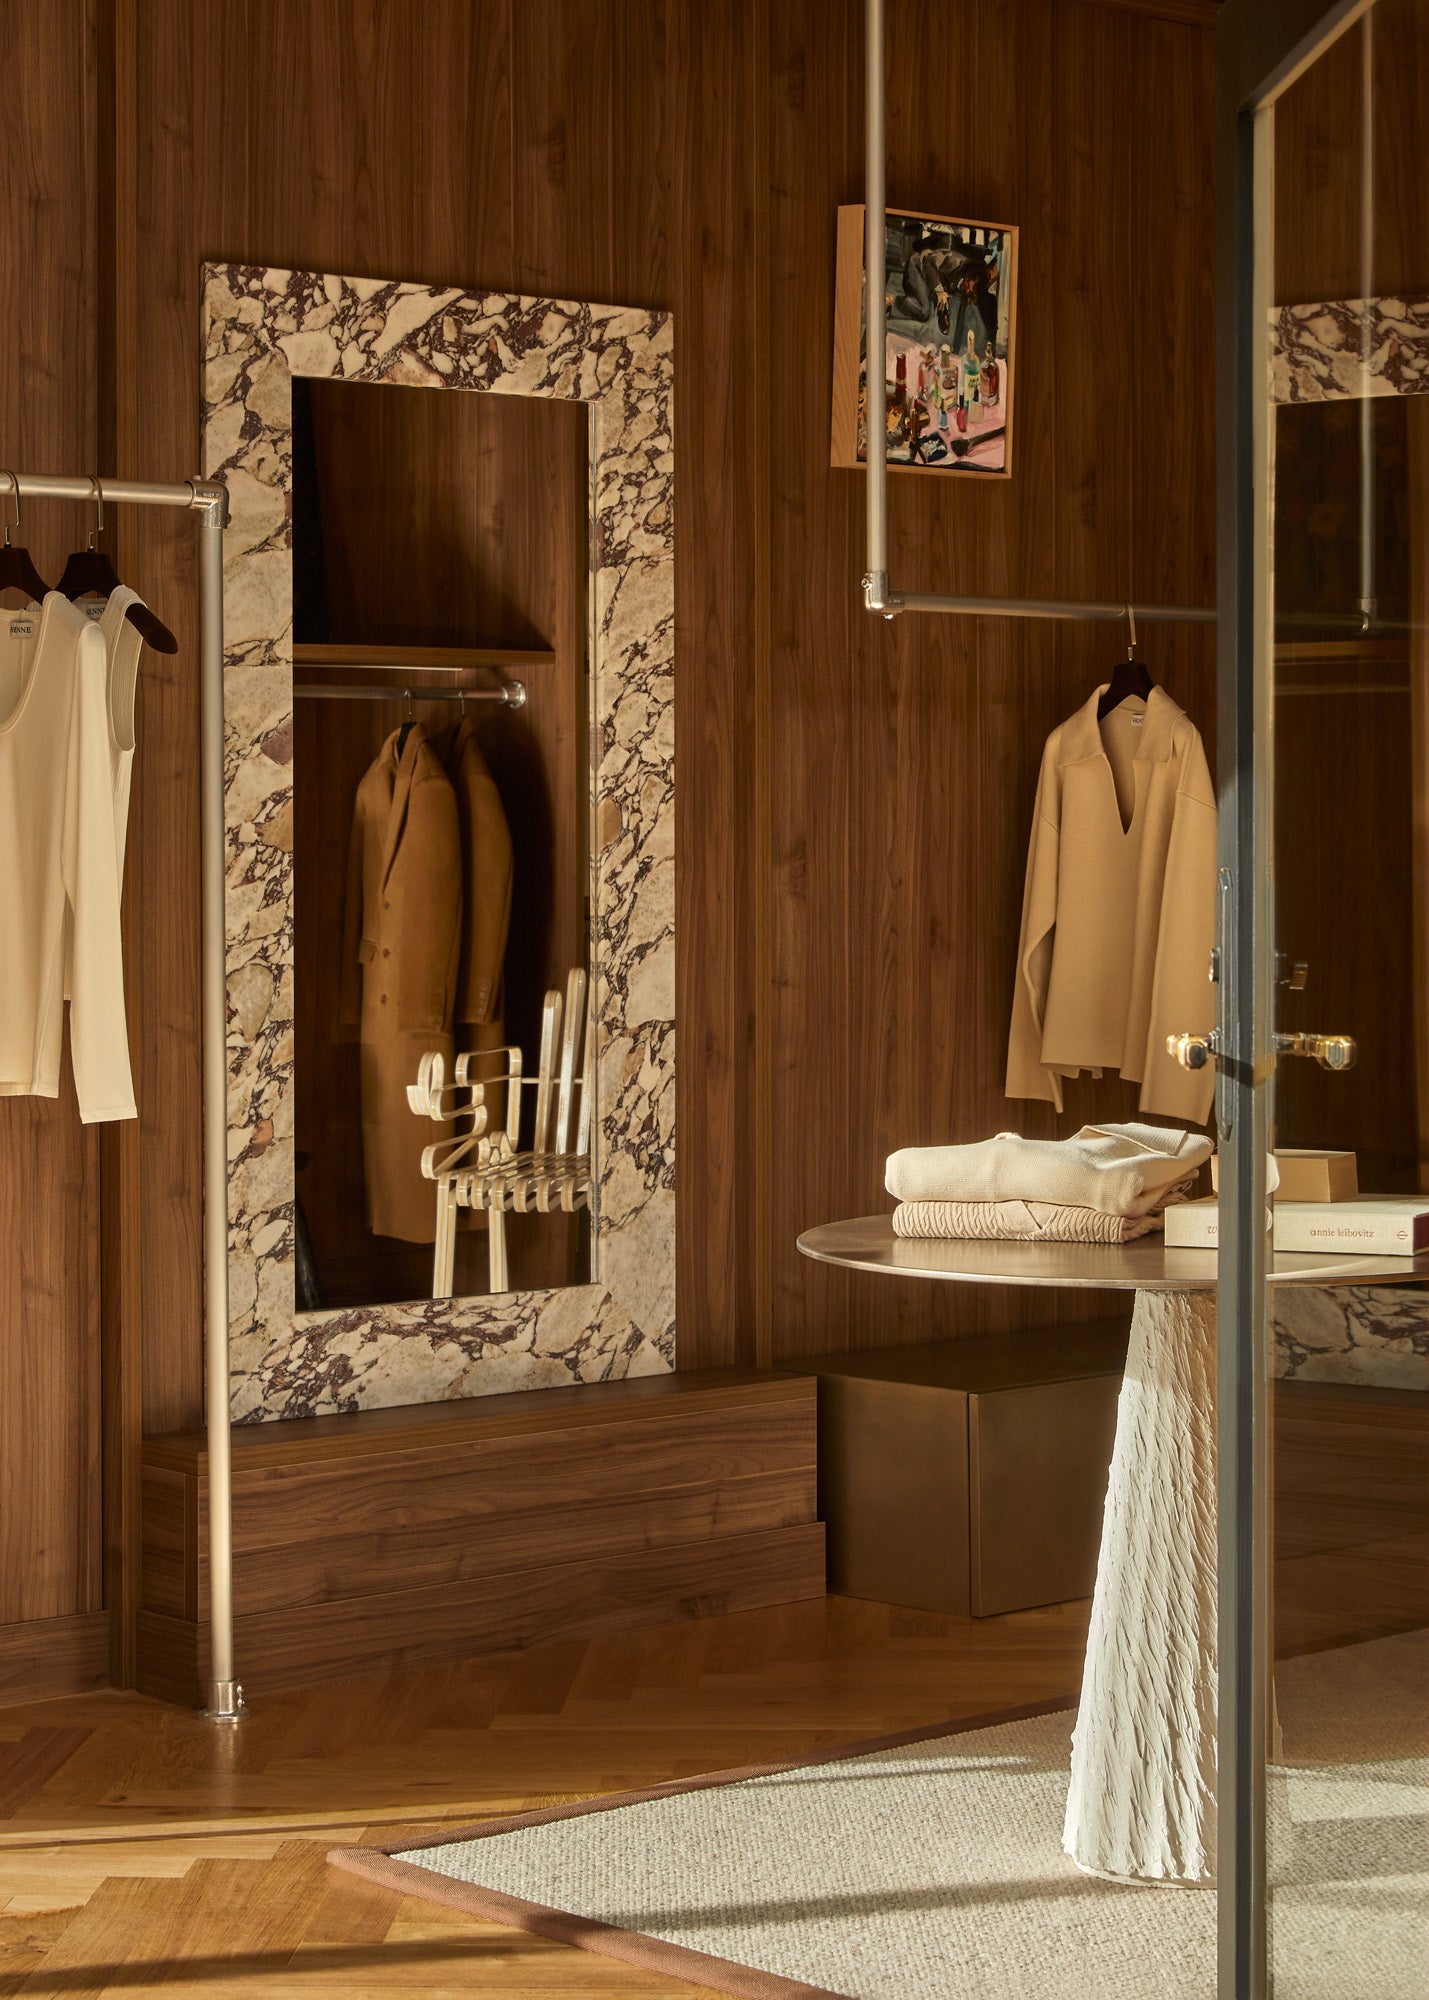 Experience the intimacy of Henne by reserving a coveted styling session at our Prahran boutique